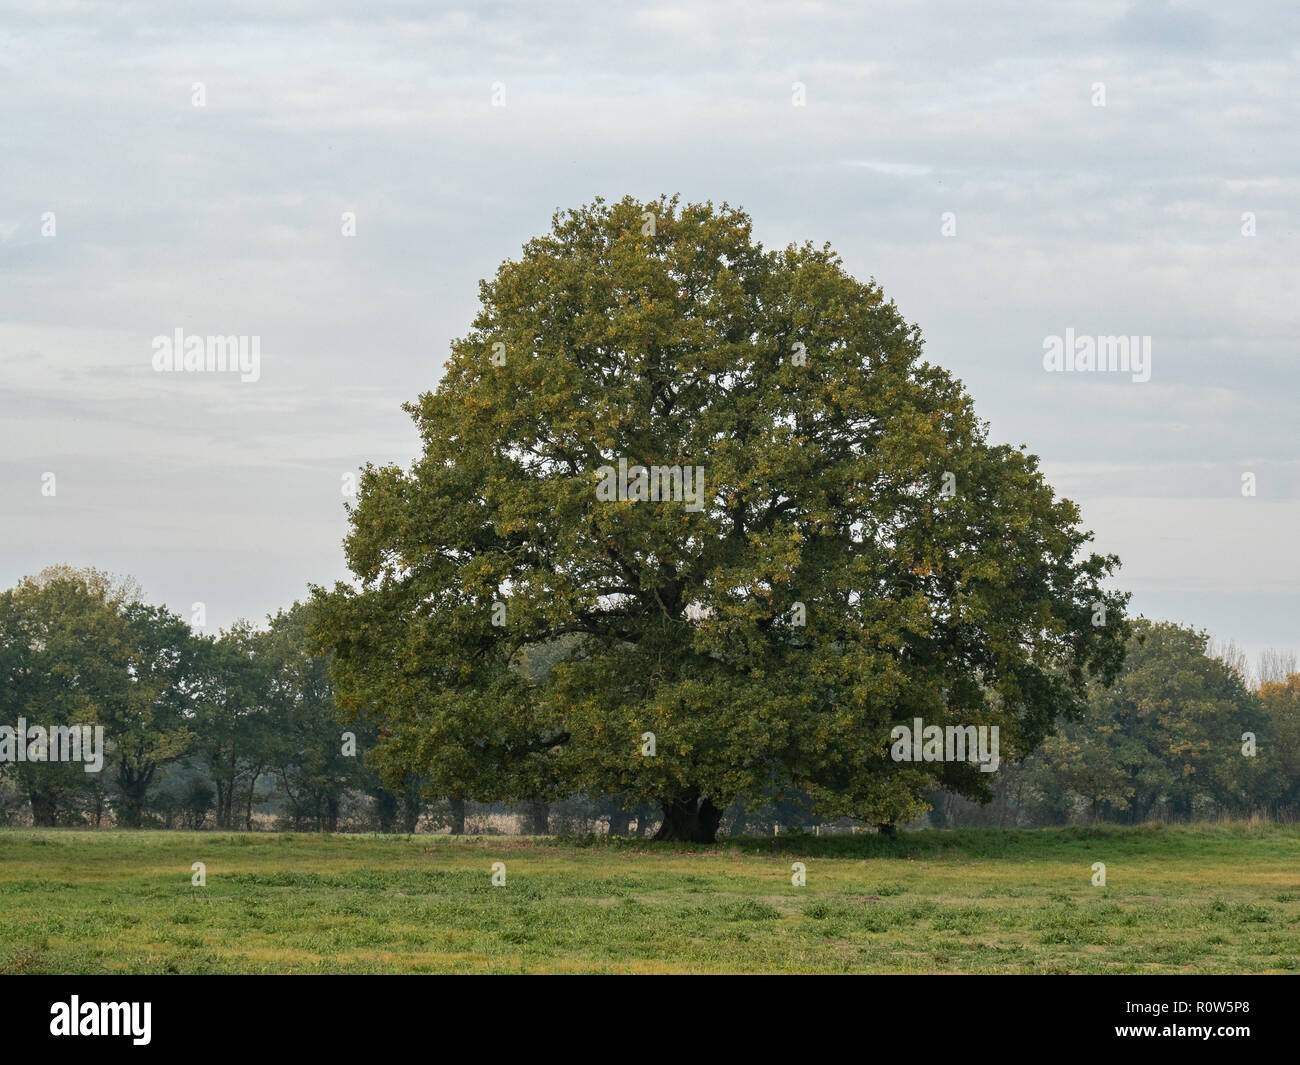 A solitary oak tree growing in an arable field showing the first tinges of autumn colour Stock Photo